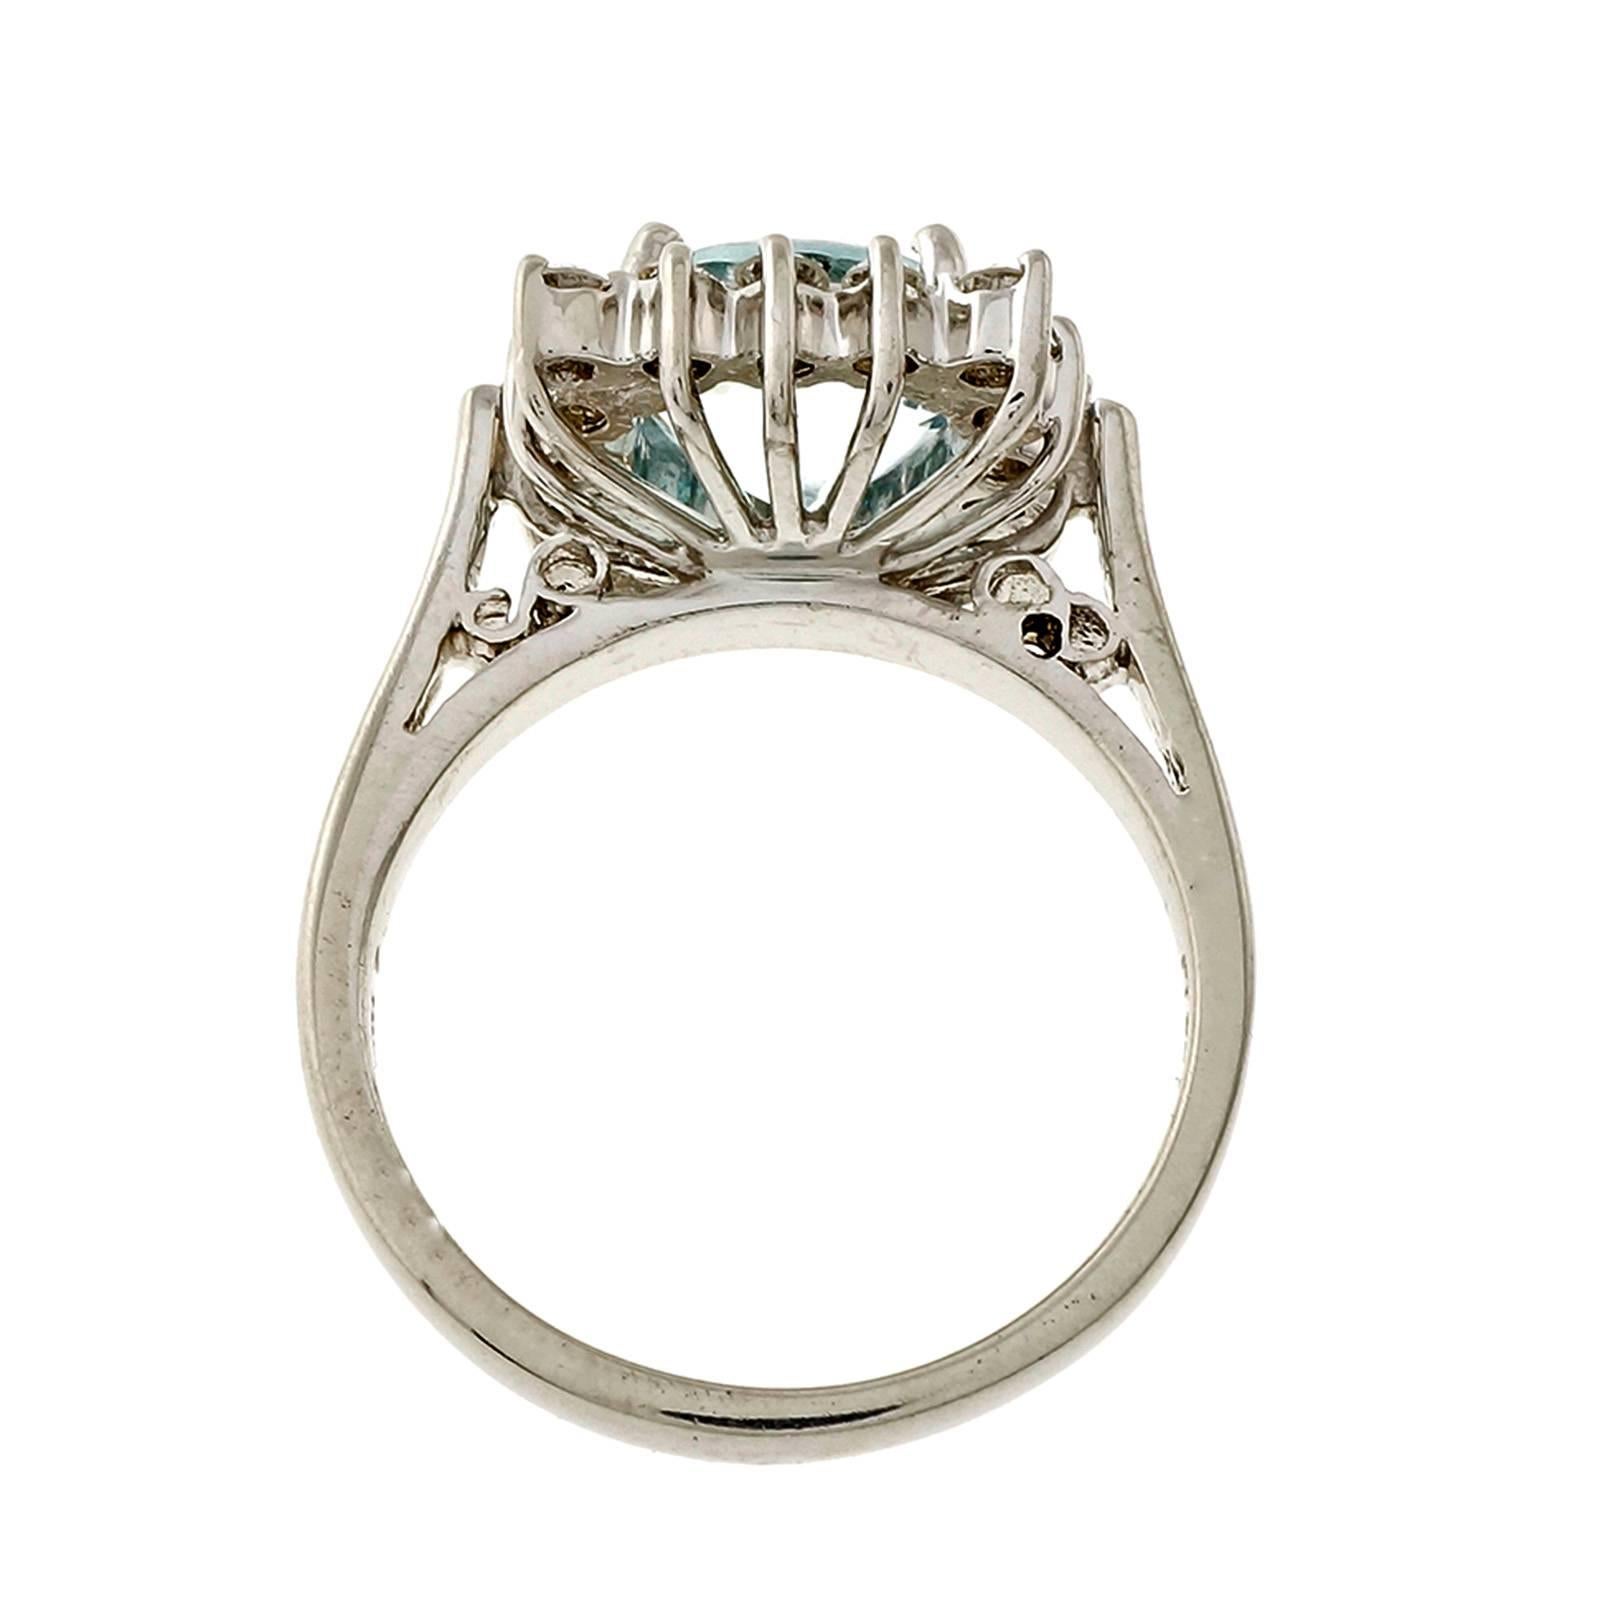 1960’s handmade wire square cocktail ring with a fine natural round Aqua in diamond halo.

1 fine untreated natural slightly greenish blue extra bright European cut Aquamarine, approx. total weight 2.53cts, VS, 9mm
16 round brilliant cut diamonds